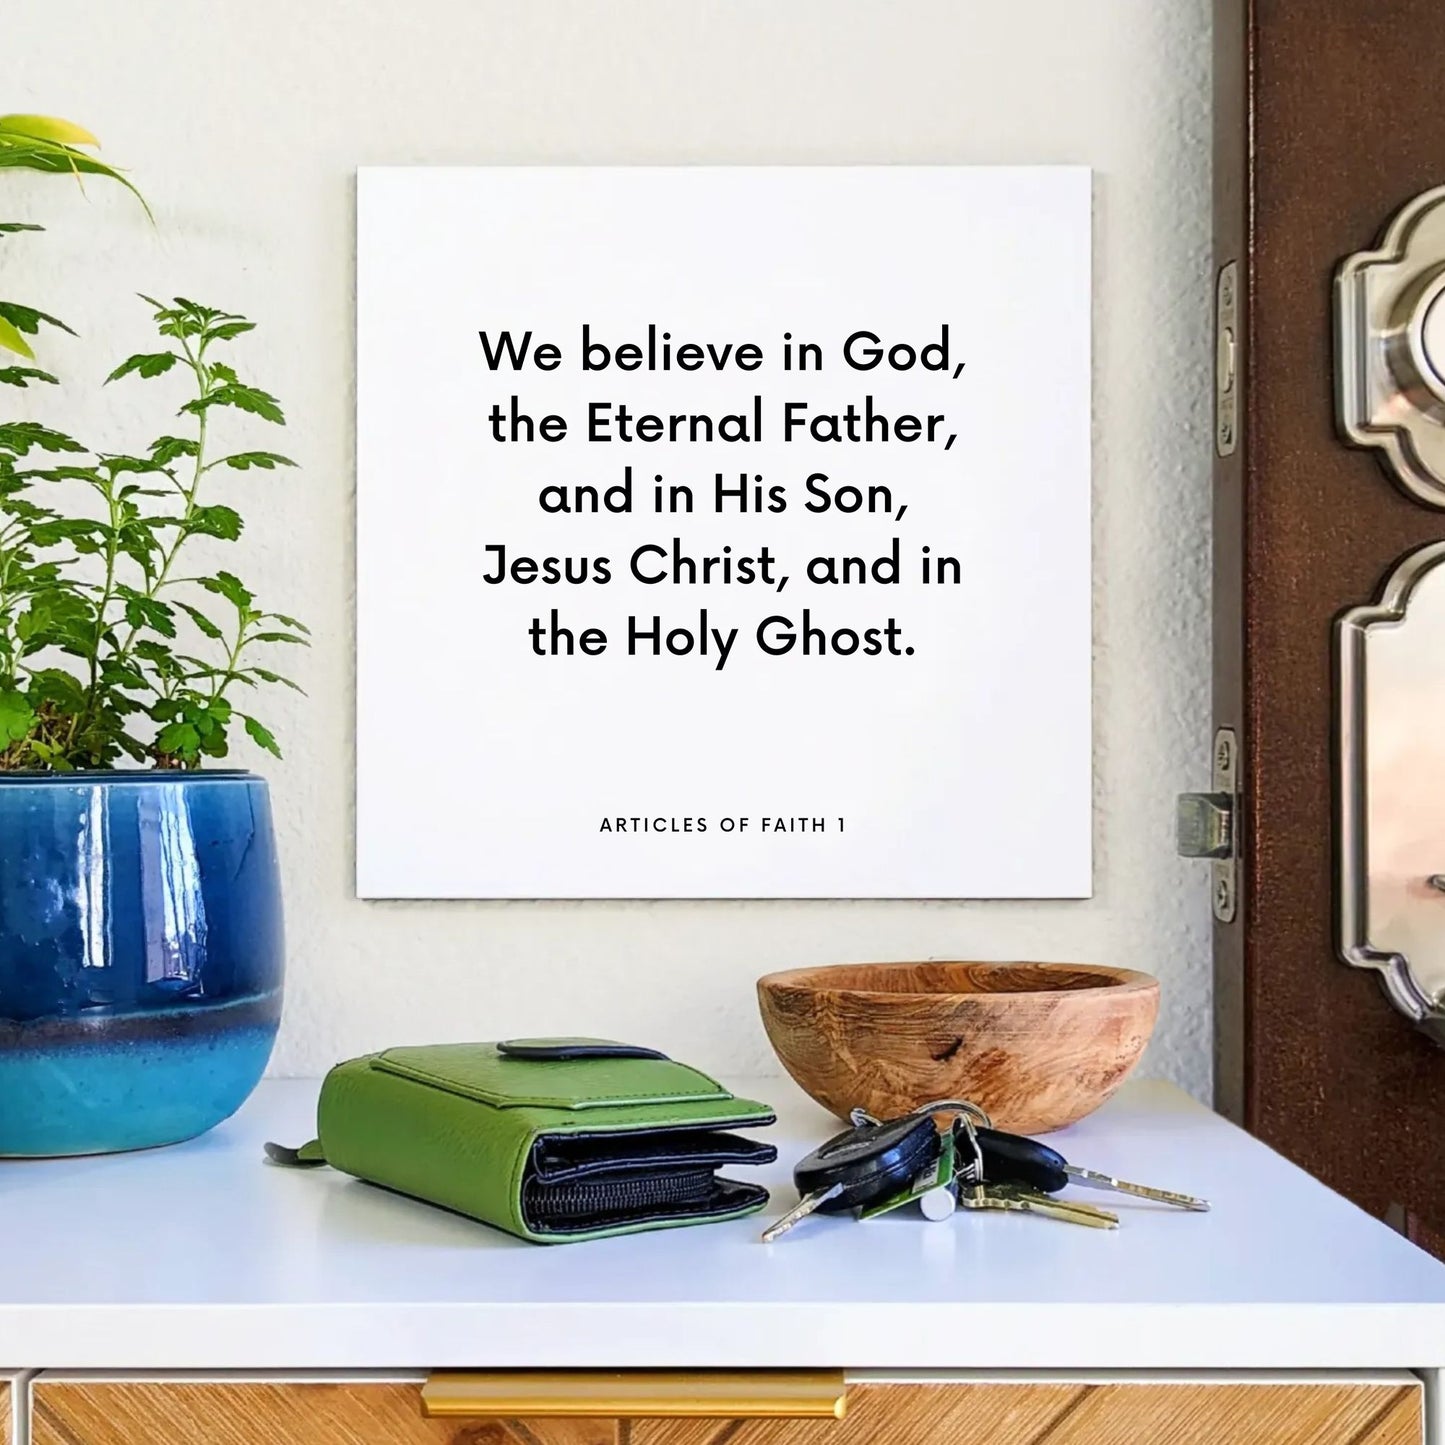 Entryway mouting of the scripture tile for Articles of Faith 1 - "We believe in God, the Eternal Father"